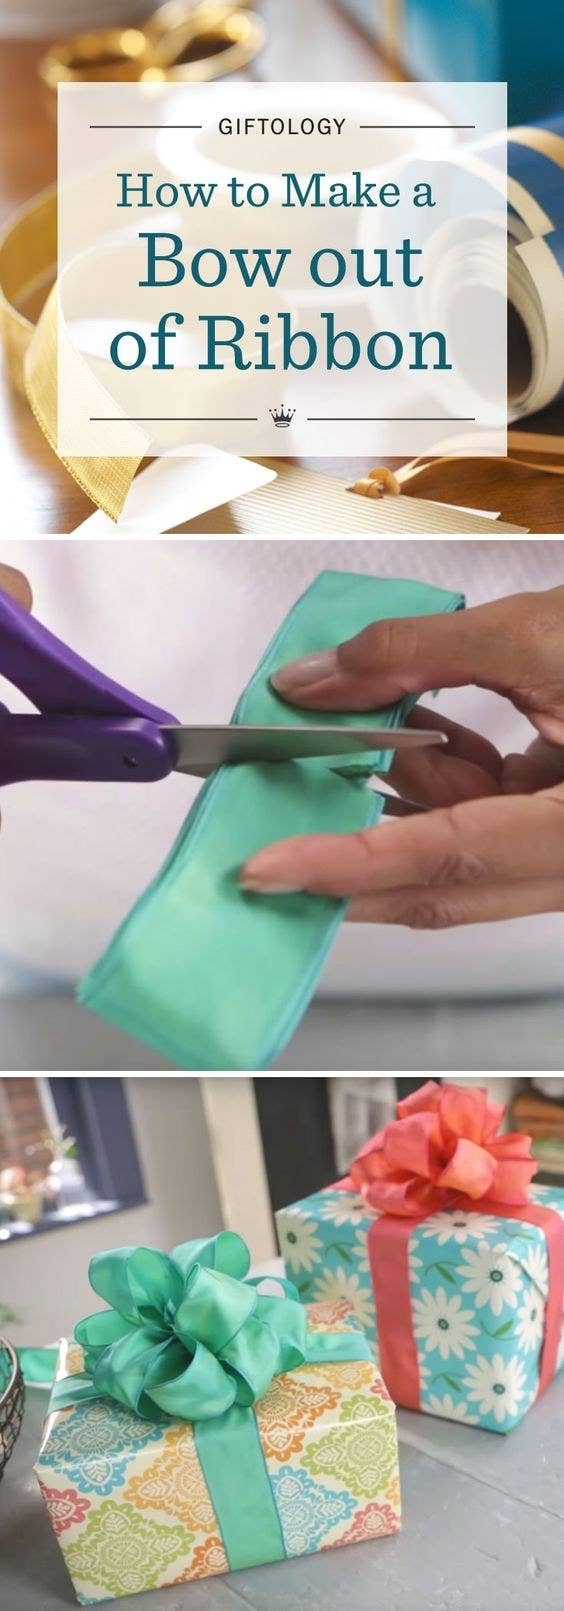 Giftology: how to put tissue paper in a gift bag